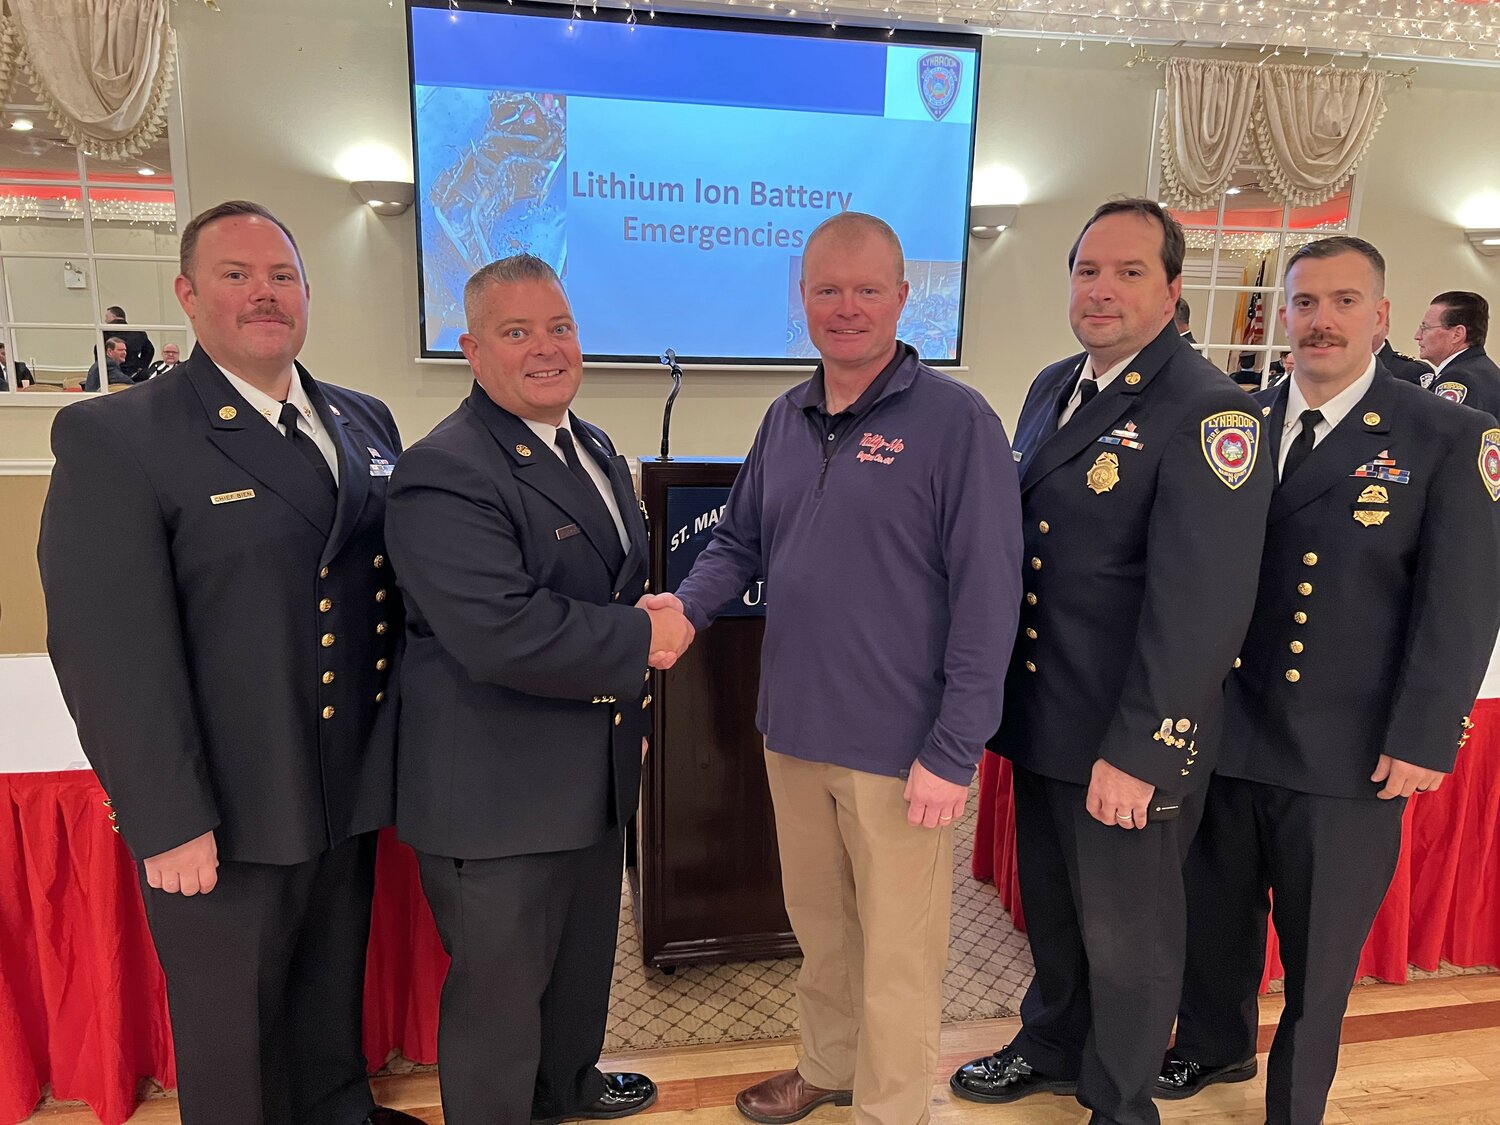 Chief Danny Ambrosio, shaking hands with FDNY Chief Edward Ryan, a former member of the Lynbrook Fire Department, after his presentation to the department membership on fighting battery fires and battery safety. First Assistant Chief Scott Bien, left, and Second Assistant Chief Clayton Murphy, and Third Assistant Chief James DiGiambattista, join in.